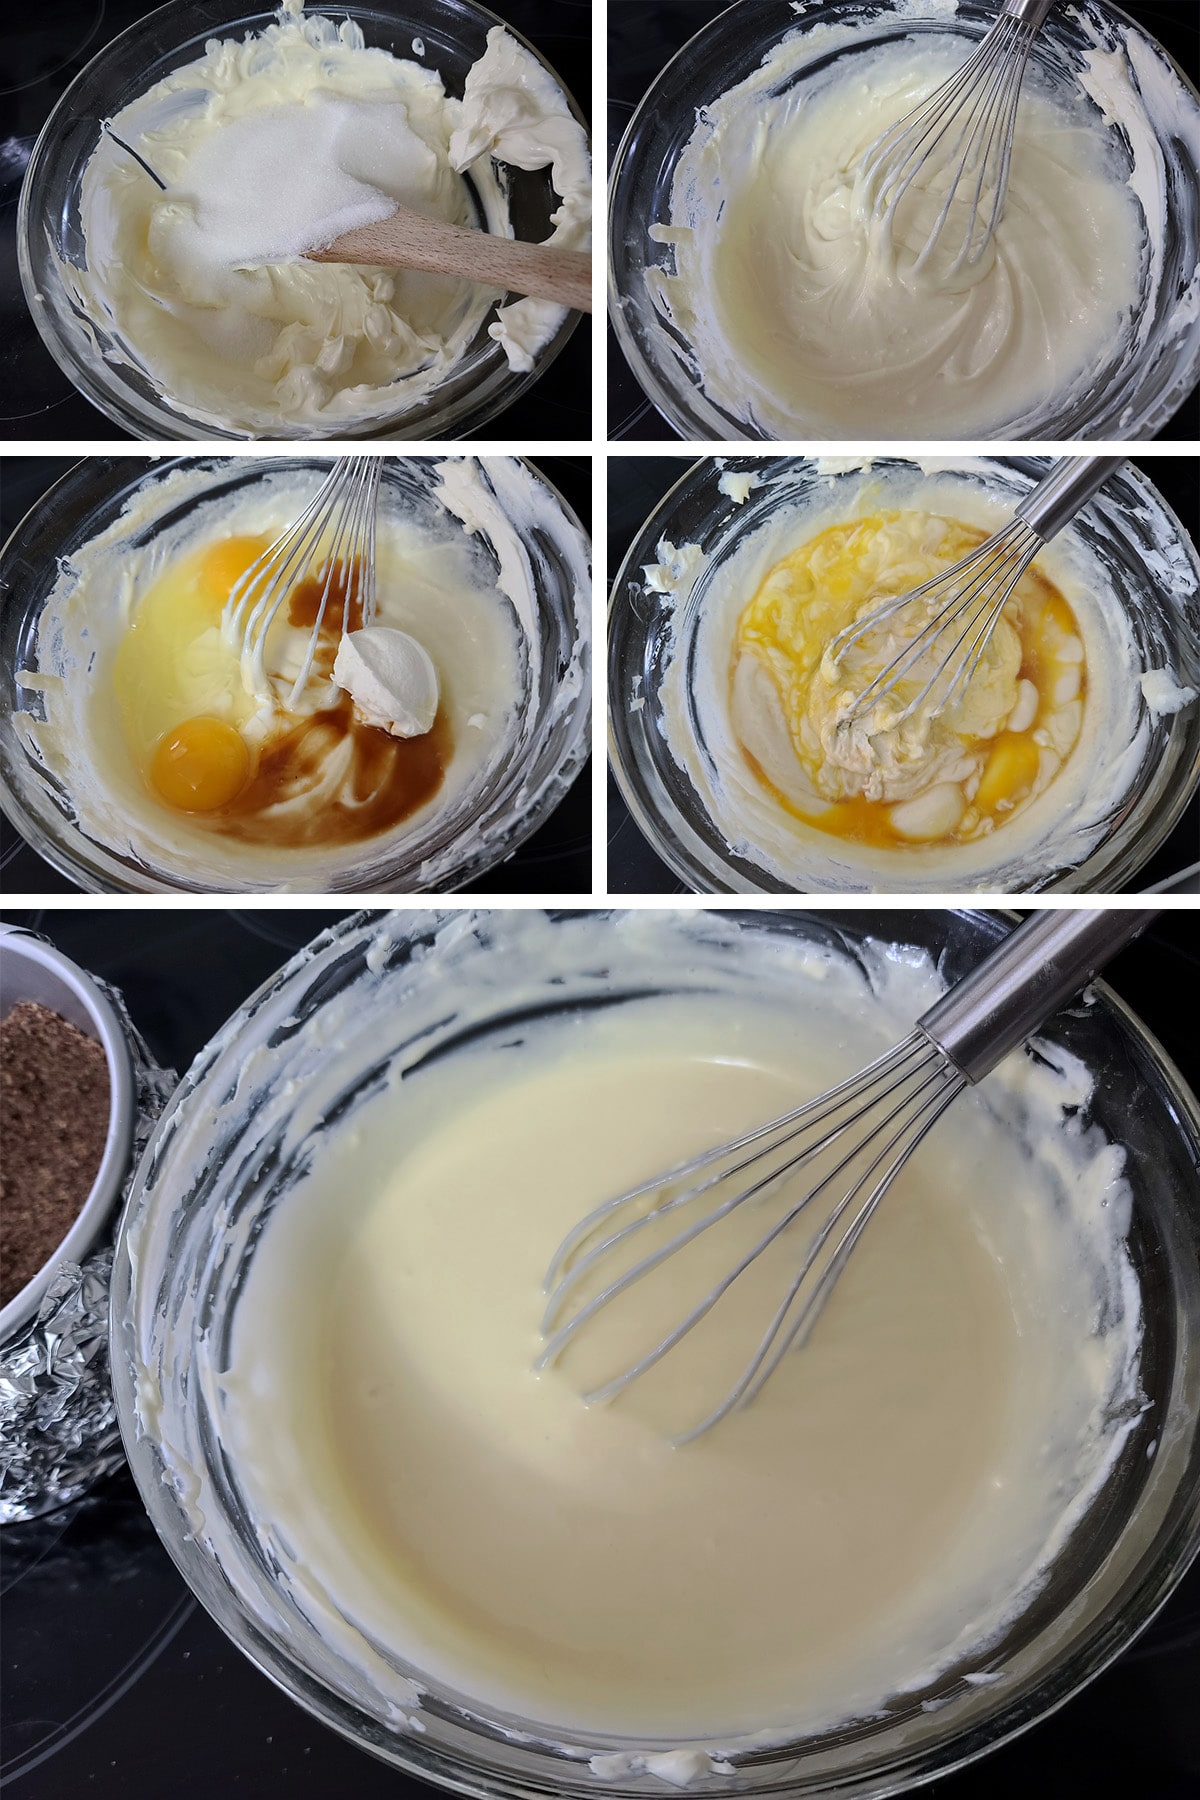 A 5 part image showing the cheesecake batter being mixed together with a whisk.